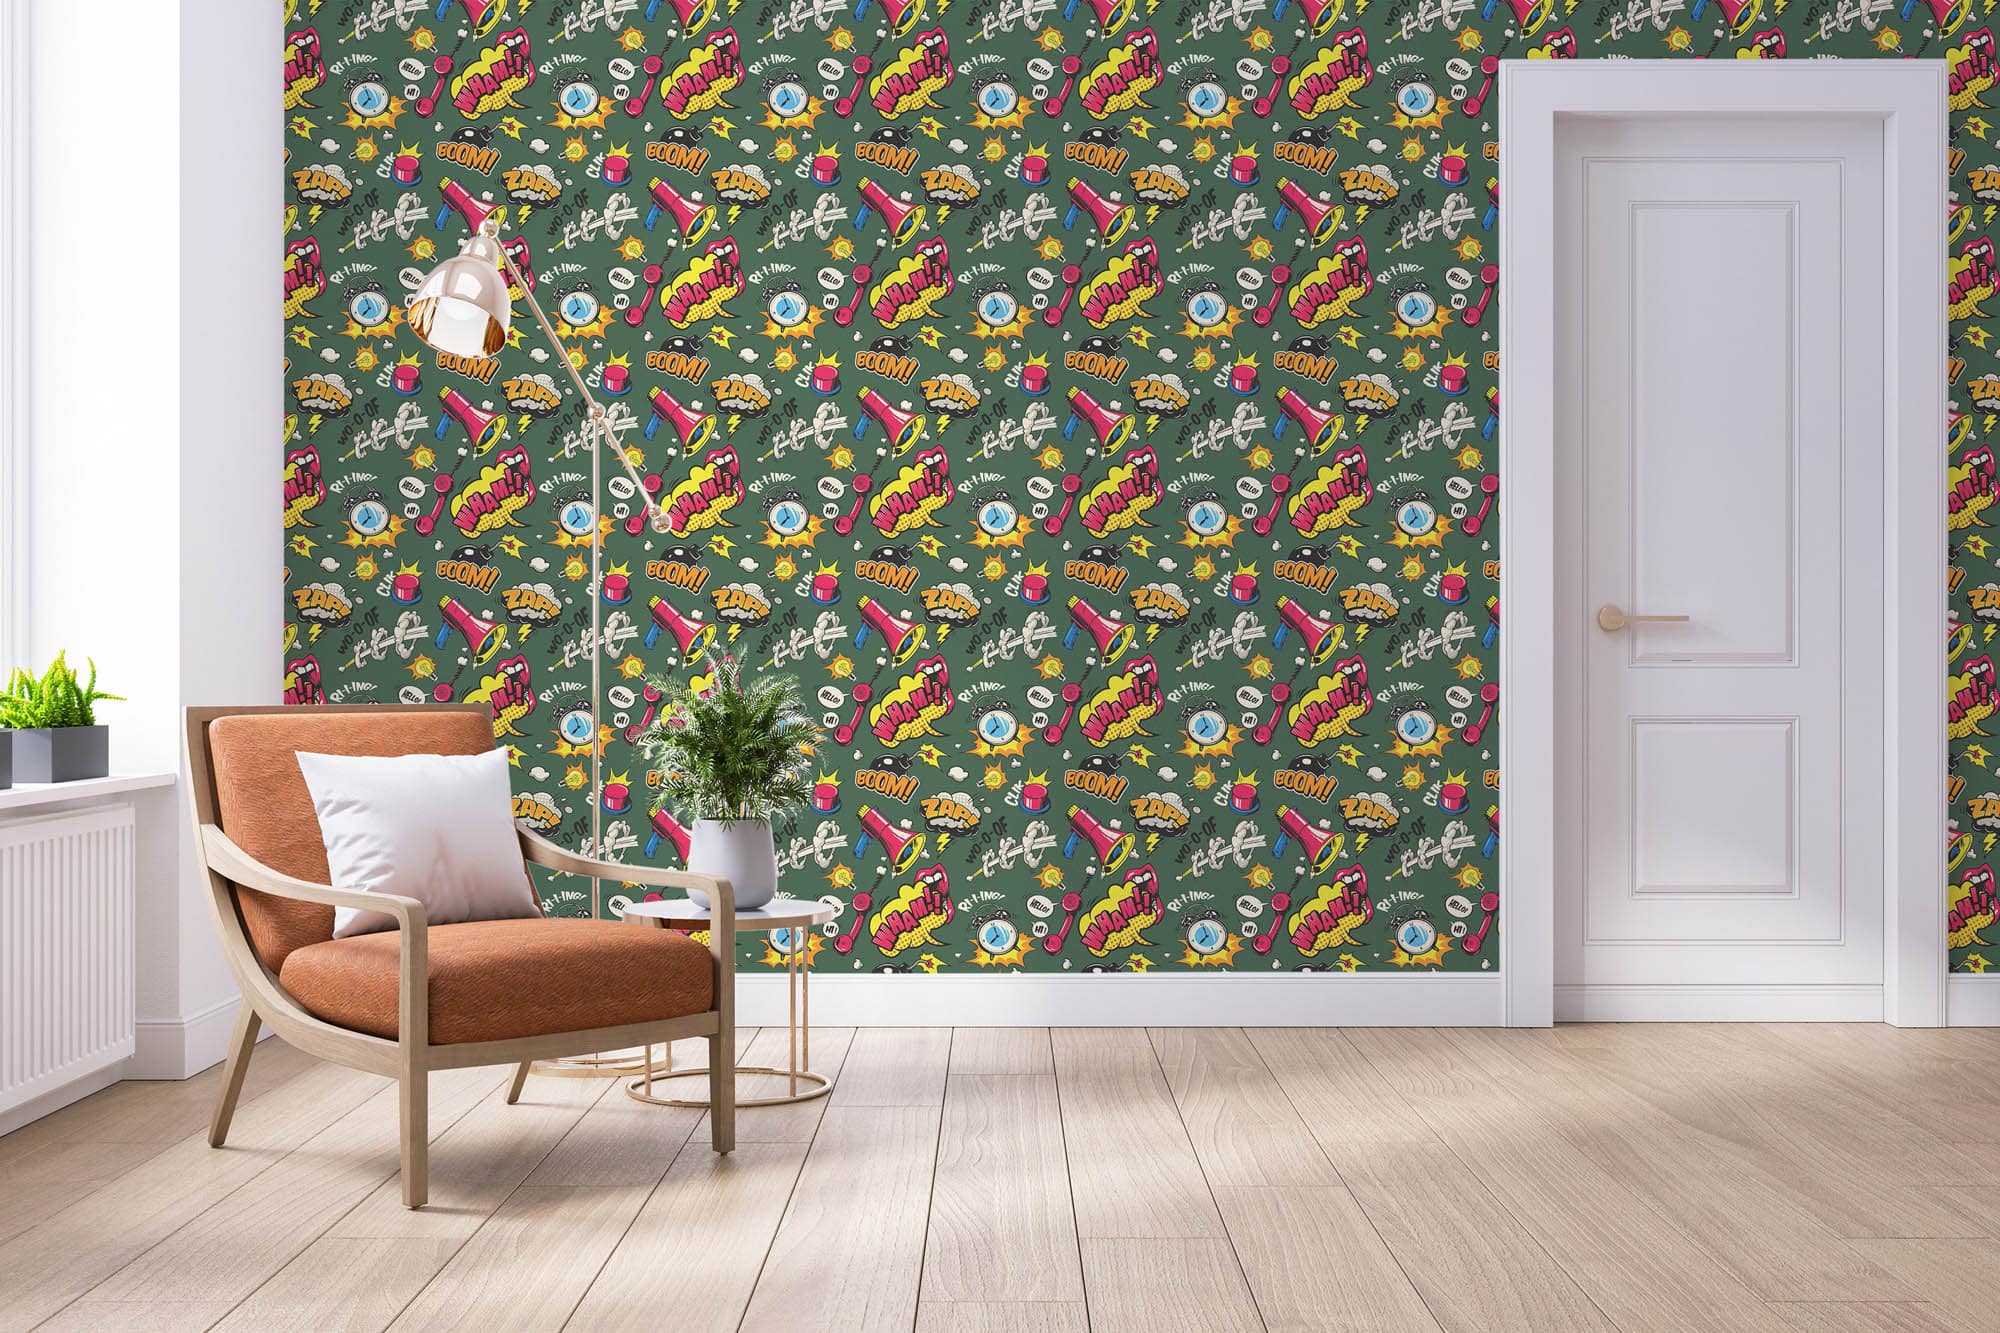 Pop art sticker wallpaper - Peel and Stick or Traditional